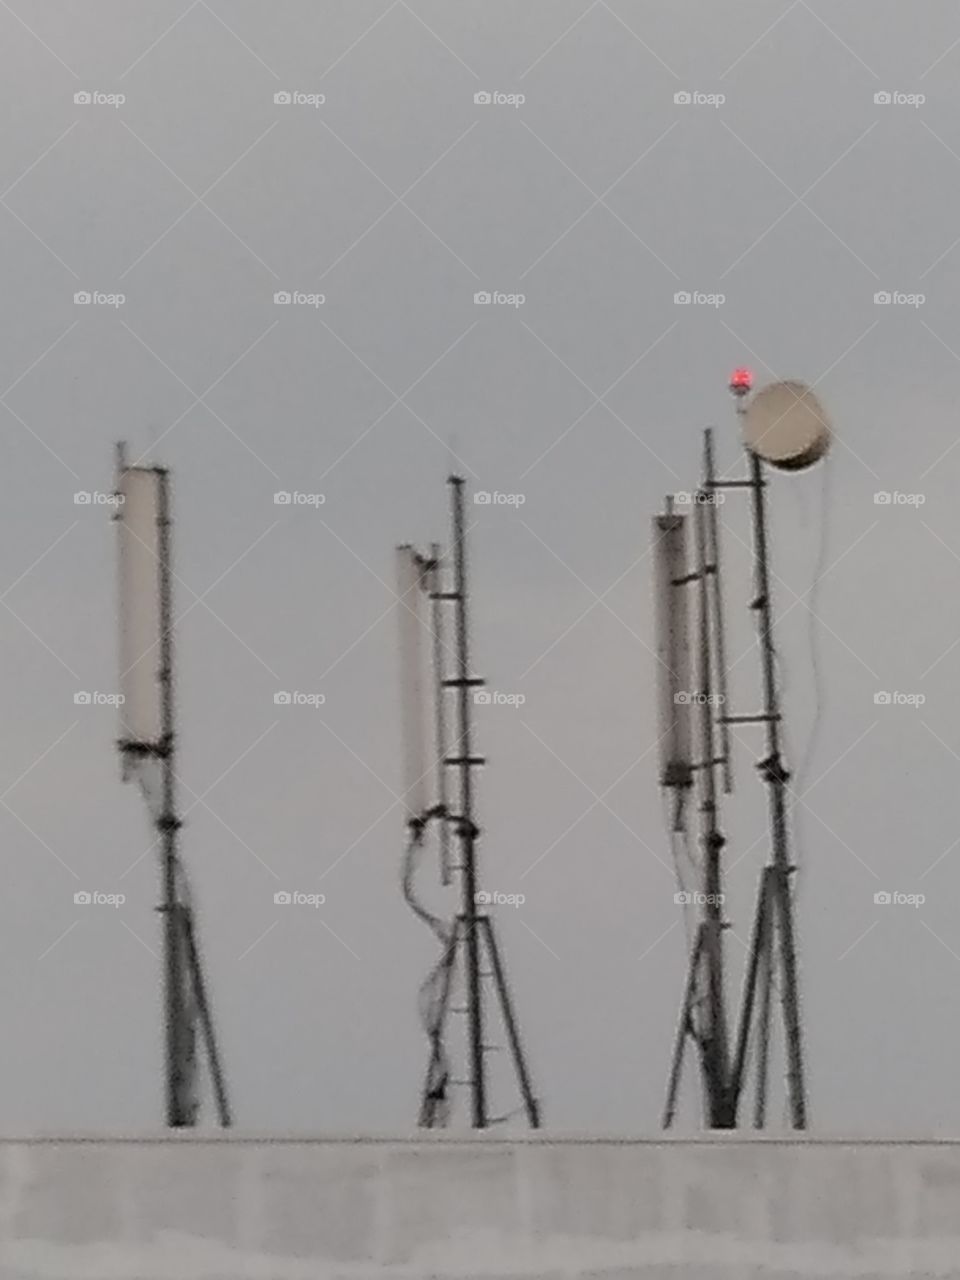 Mobile Phone signal towers